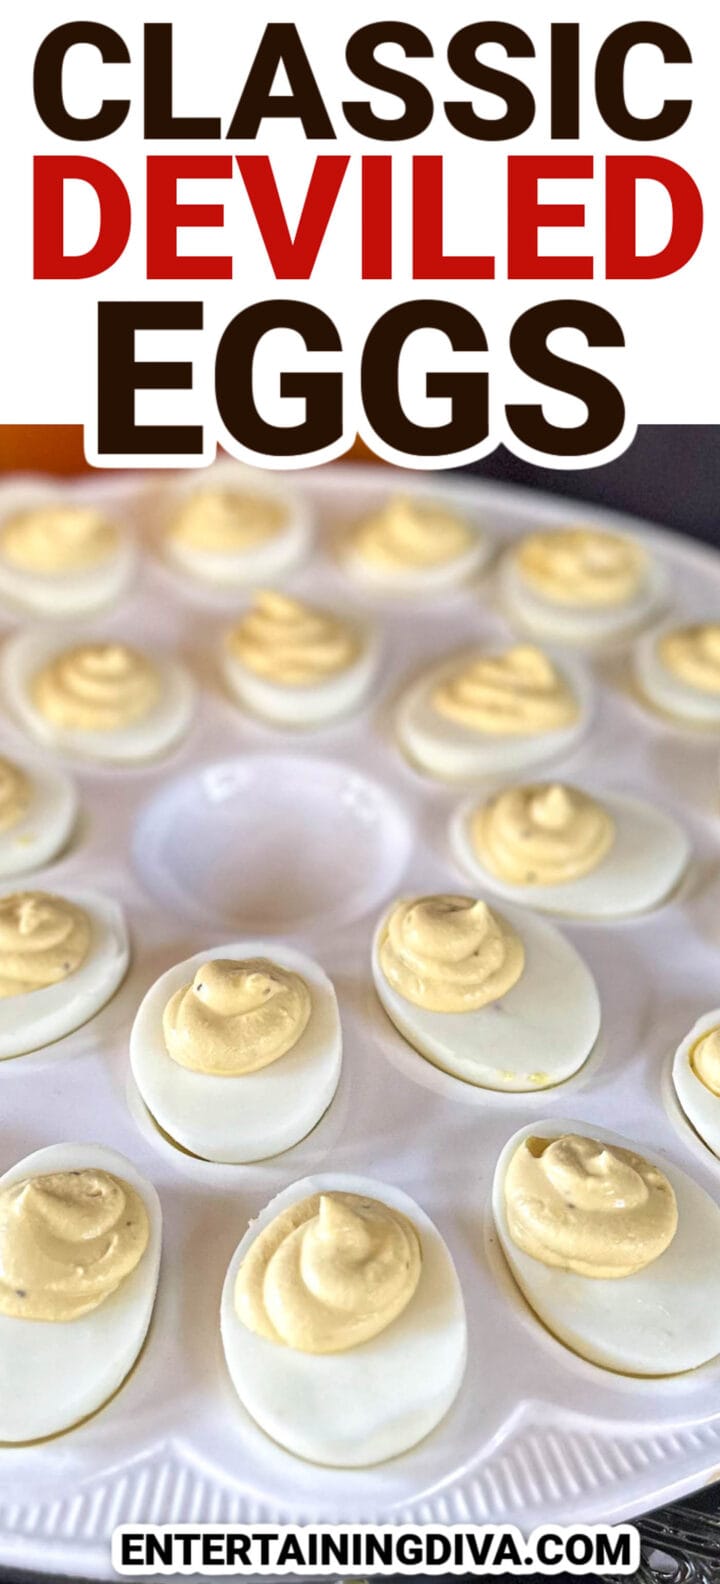 Classic deviled eggs arranged on a plate, accompanied by the text "classic deviled eggs".